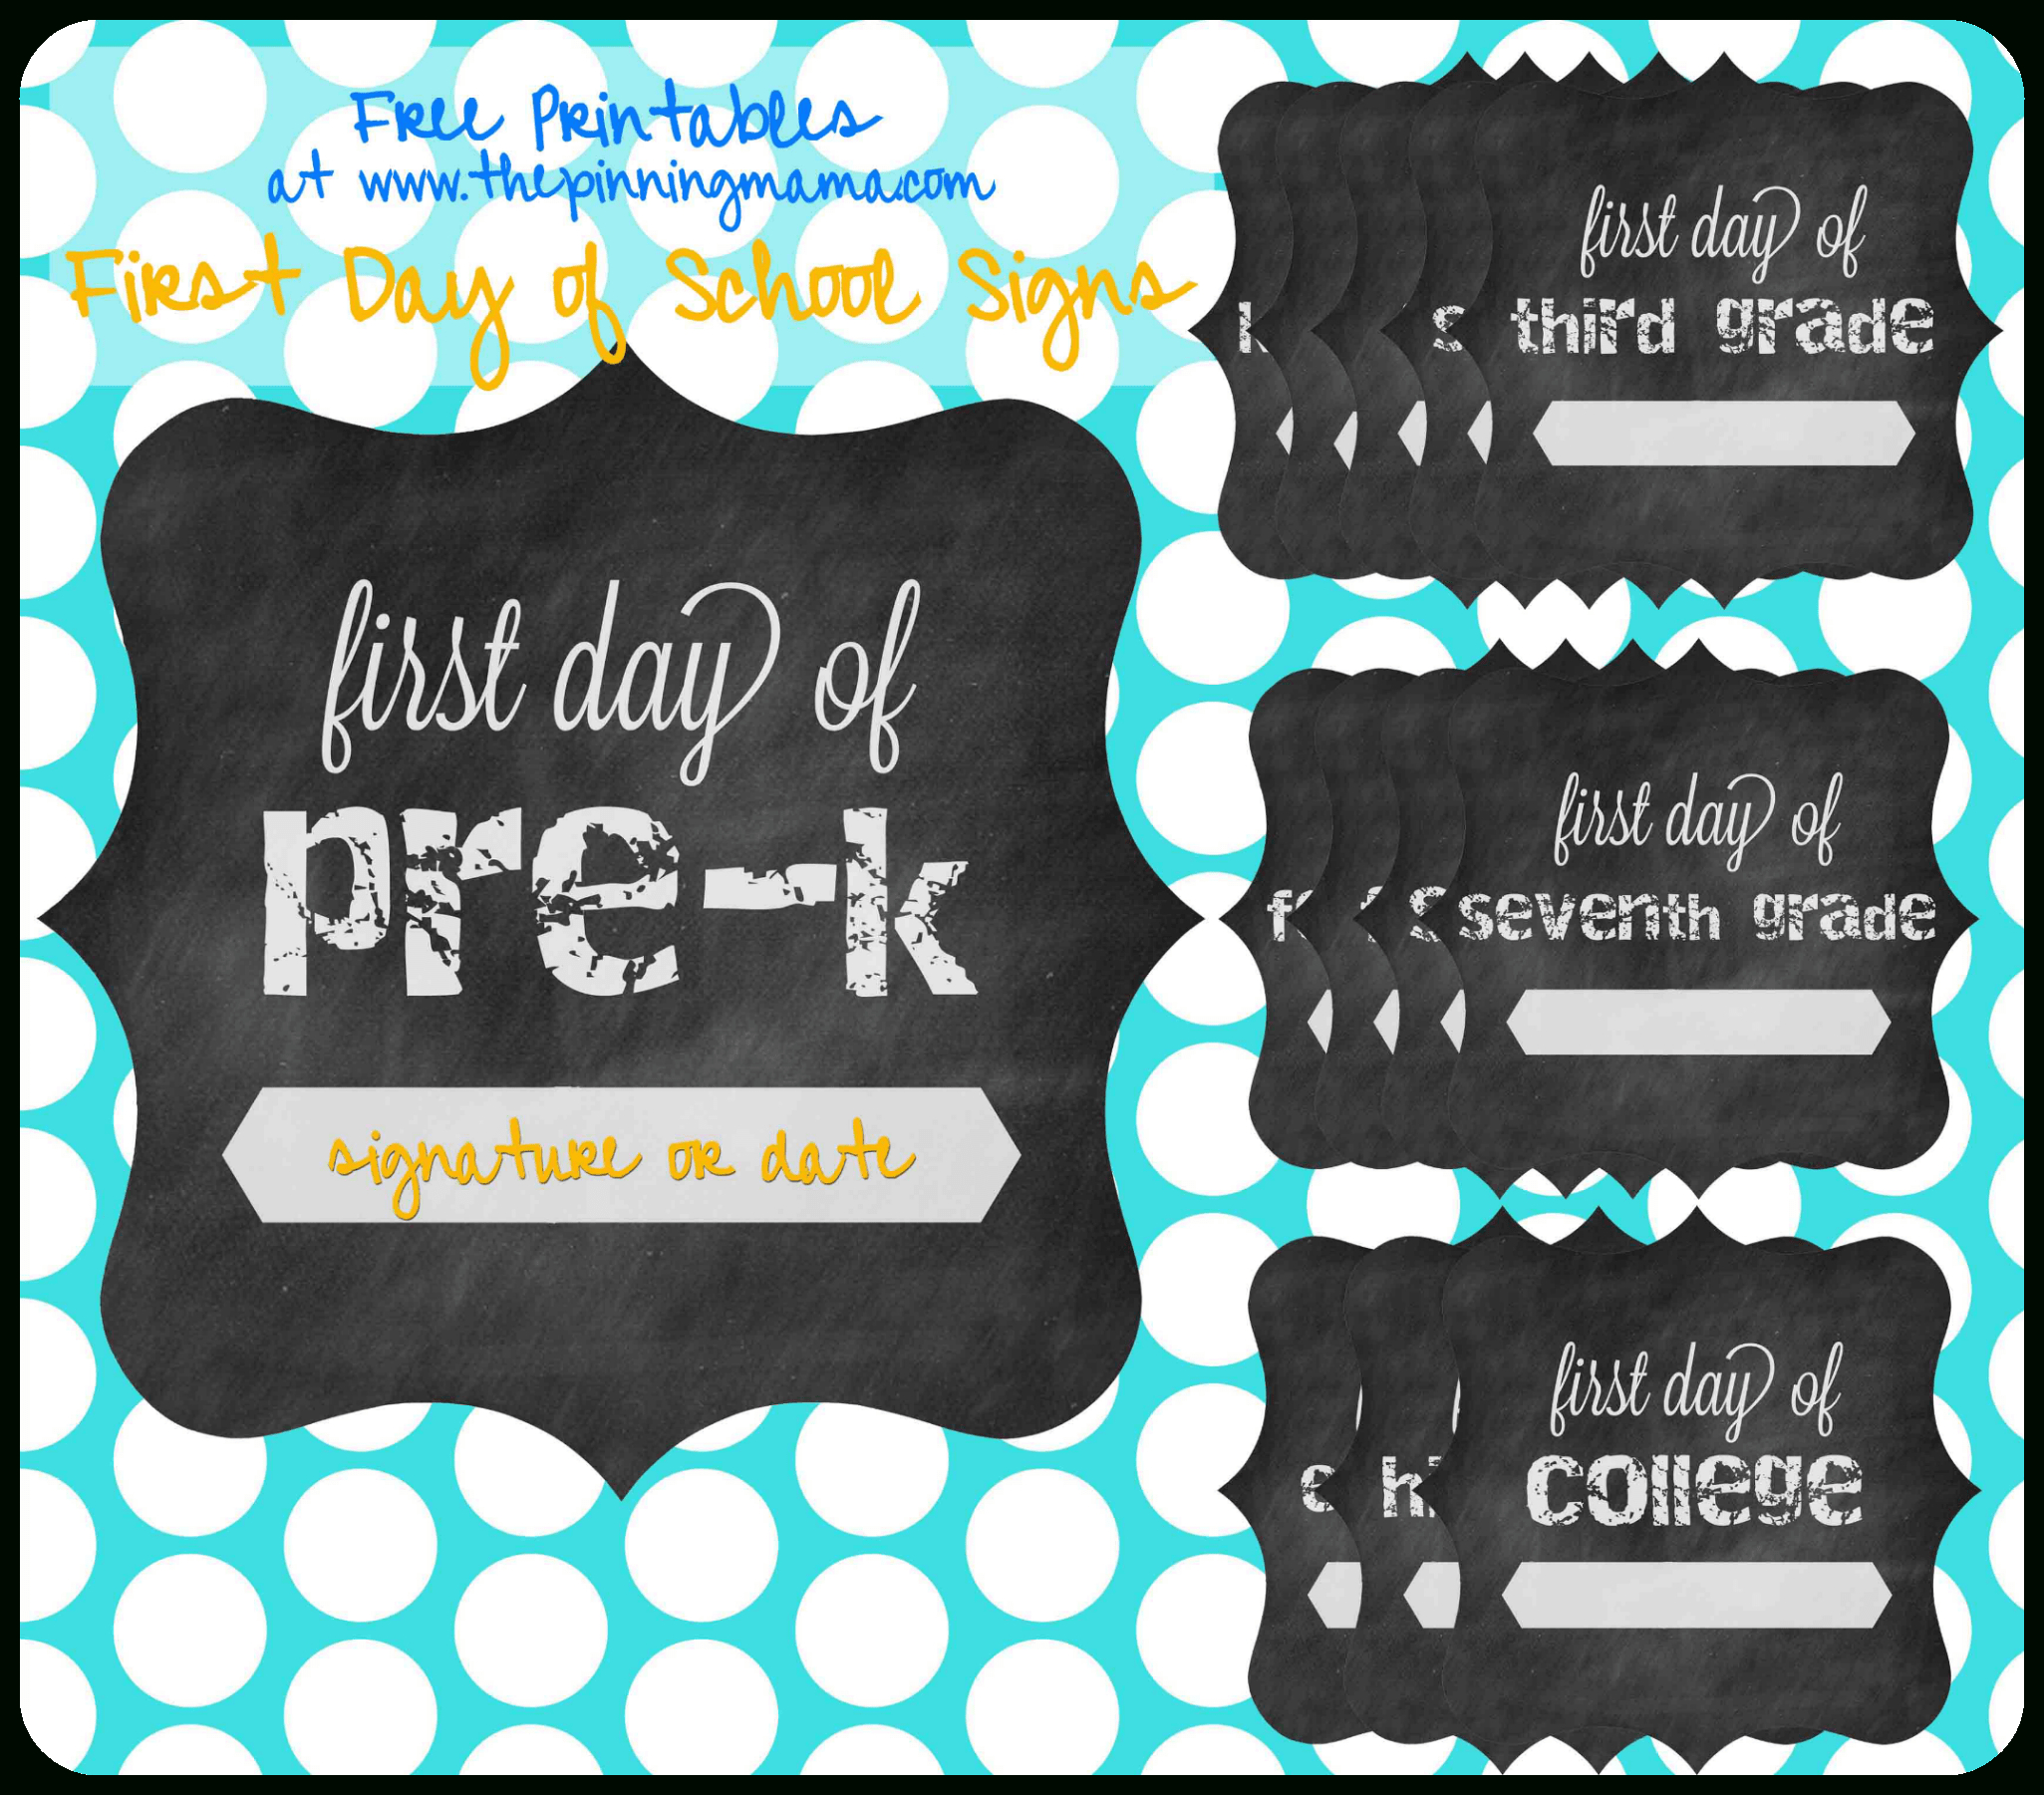 free-printable-first-day-of-school-chalkboard-signs-free-printable